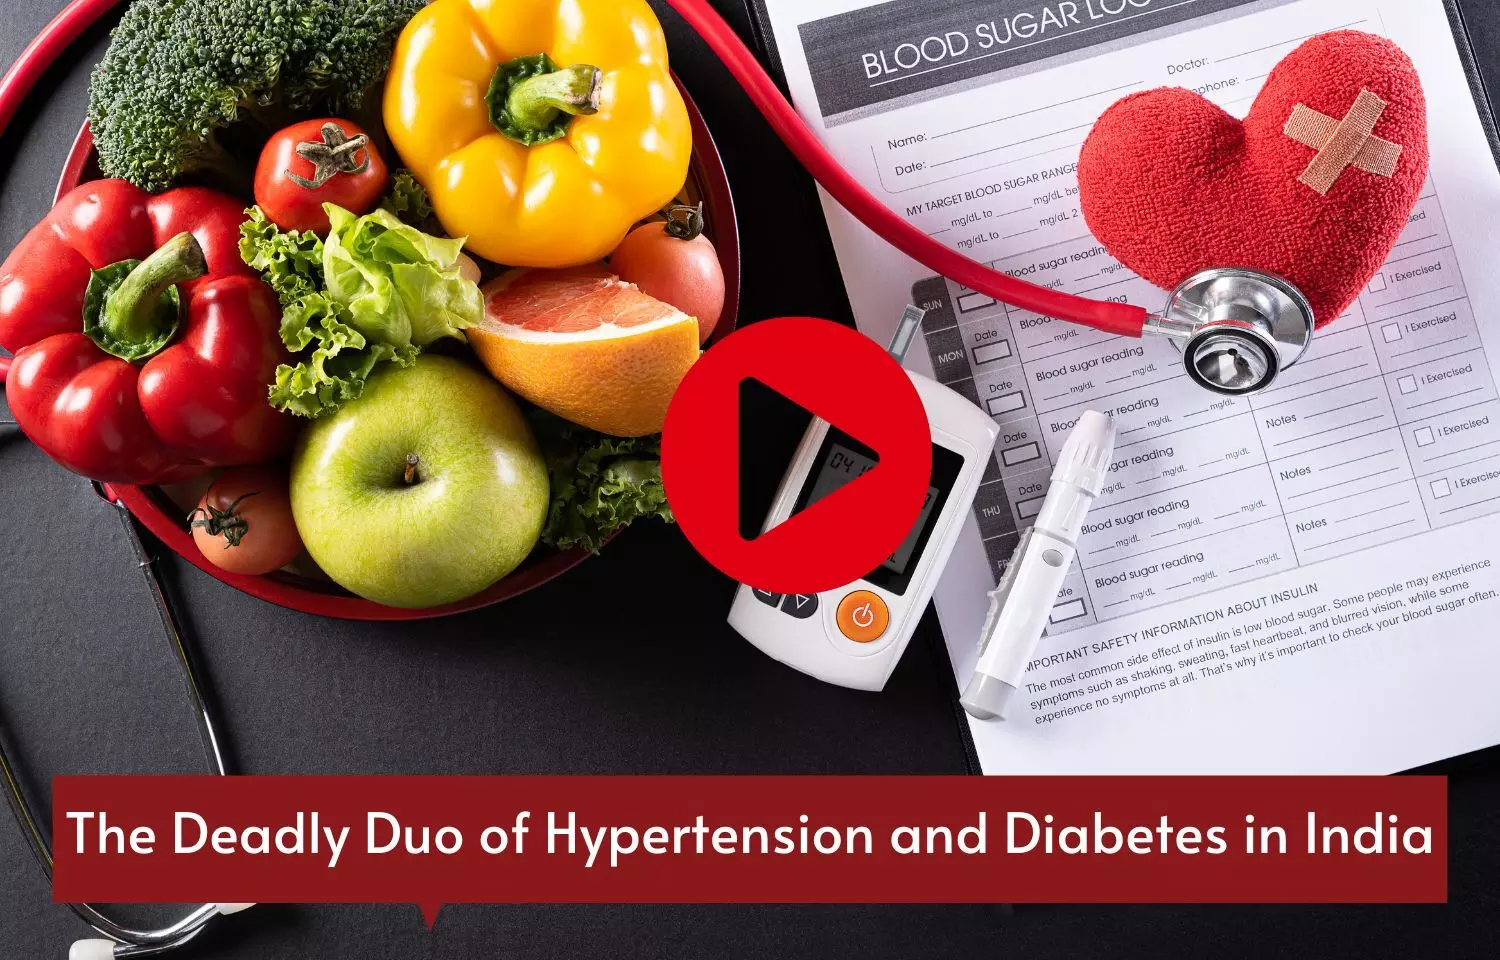 The Deadly Duo of Hypertension and Diabetes in India